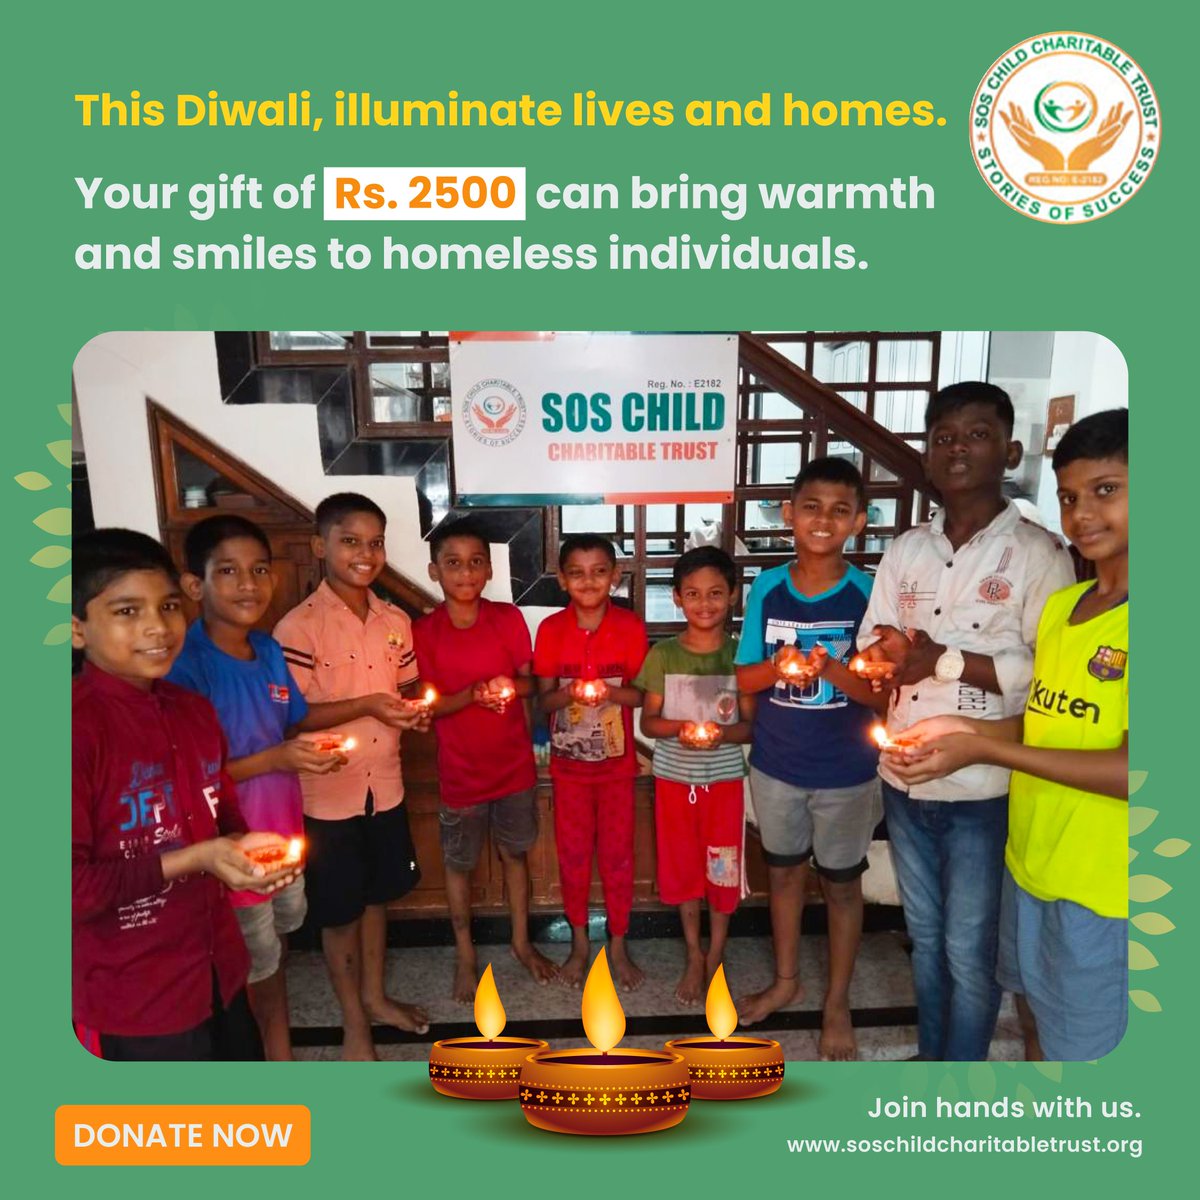 This Diwali, illuminate lives and homes. Your gift of Rs. 2500 can bring warmth and smiles to homeless individuals. 🪔💖 

#DiwaliGifts #SpreadLove #KindnessMatters #HomelessSupport #DonateForChange #LightUpHearts #Trust #SOS #TogetherWeCan #MakingADifference #HelpingHand